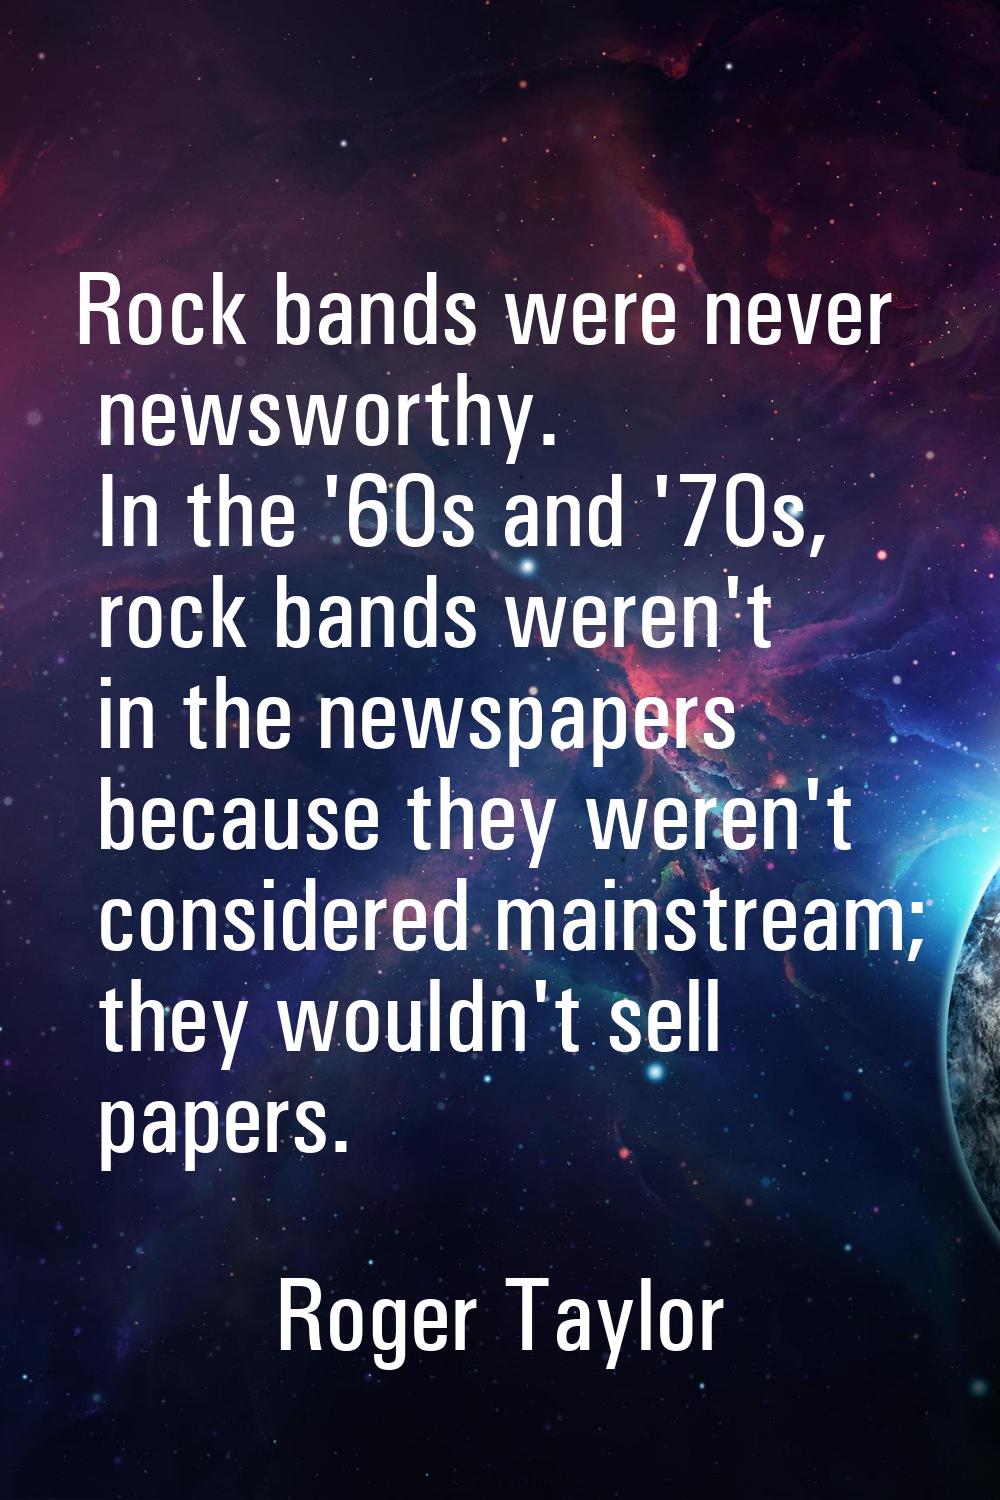 Rock bands were never newsworthy. In the '60s and '70s, rock bands weren't in the newspapers becaus